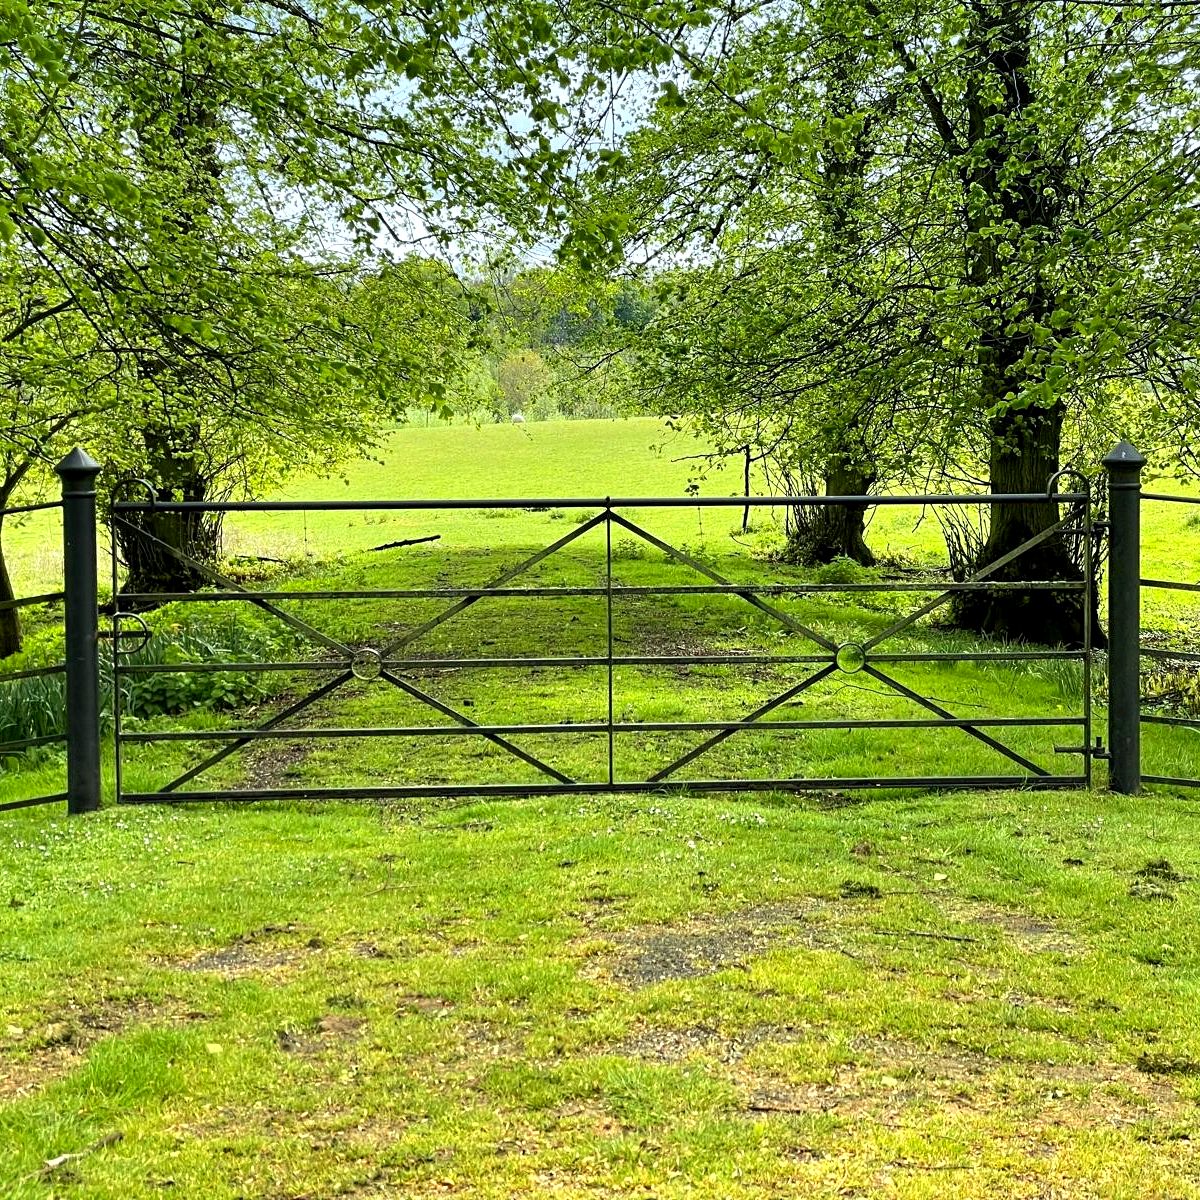 Quadrant Estate Gates provide the same classic design as our Diamond gates but have more central detailing. These gates are very popular for use as driveway or entrance gates, coming highly recommended by our customers

#quadrantgate
#gate
#metalgate
#estategate
#thetraditionalco